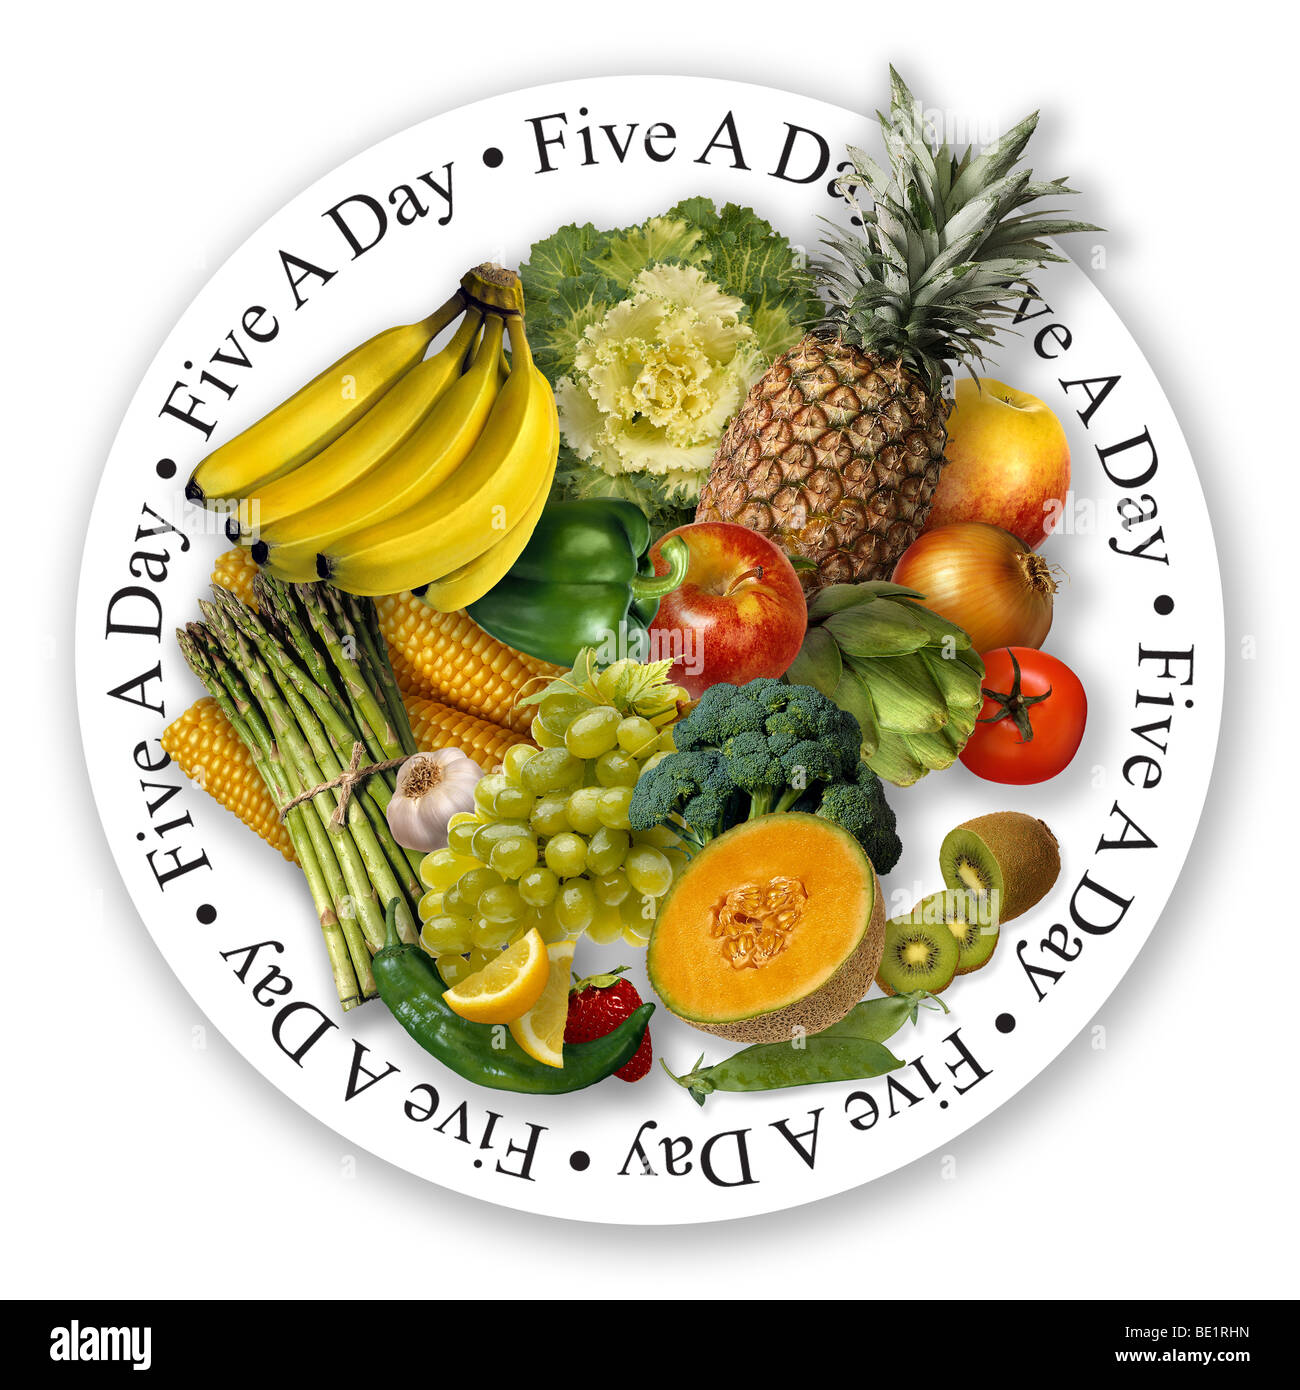 Fruit and vegetables on circular white plate with Five A Day written in black lettering around the outside of the plate. Stock Photo